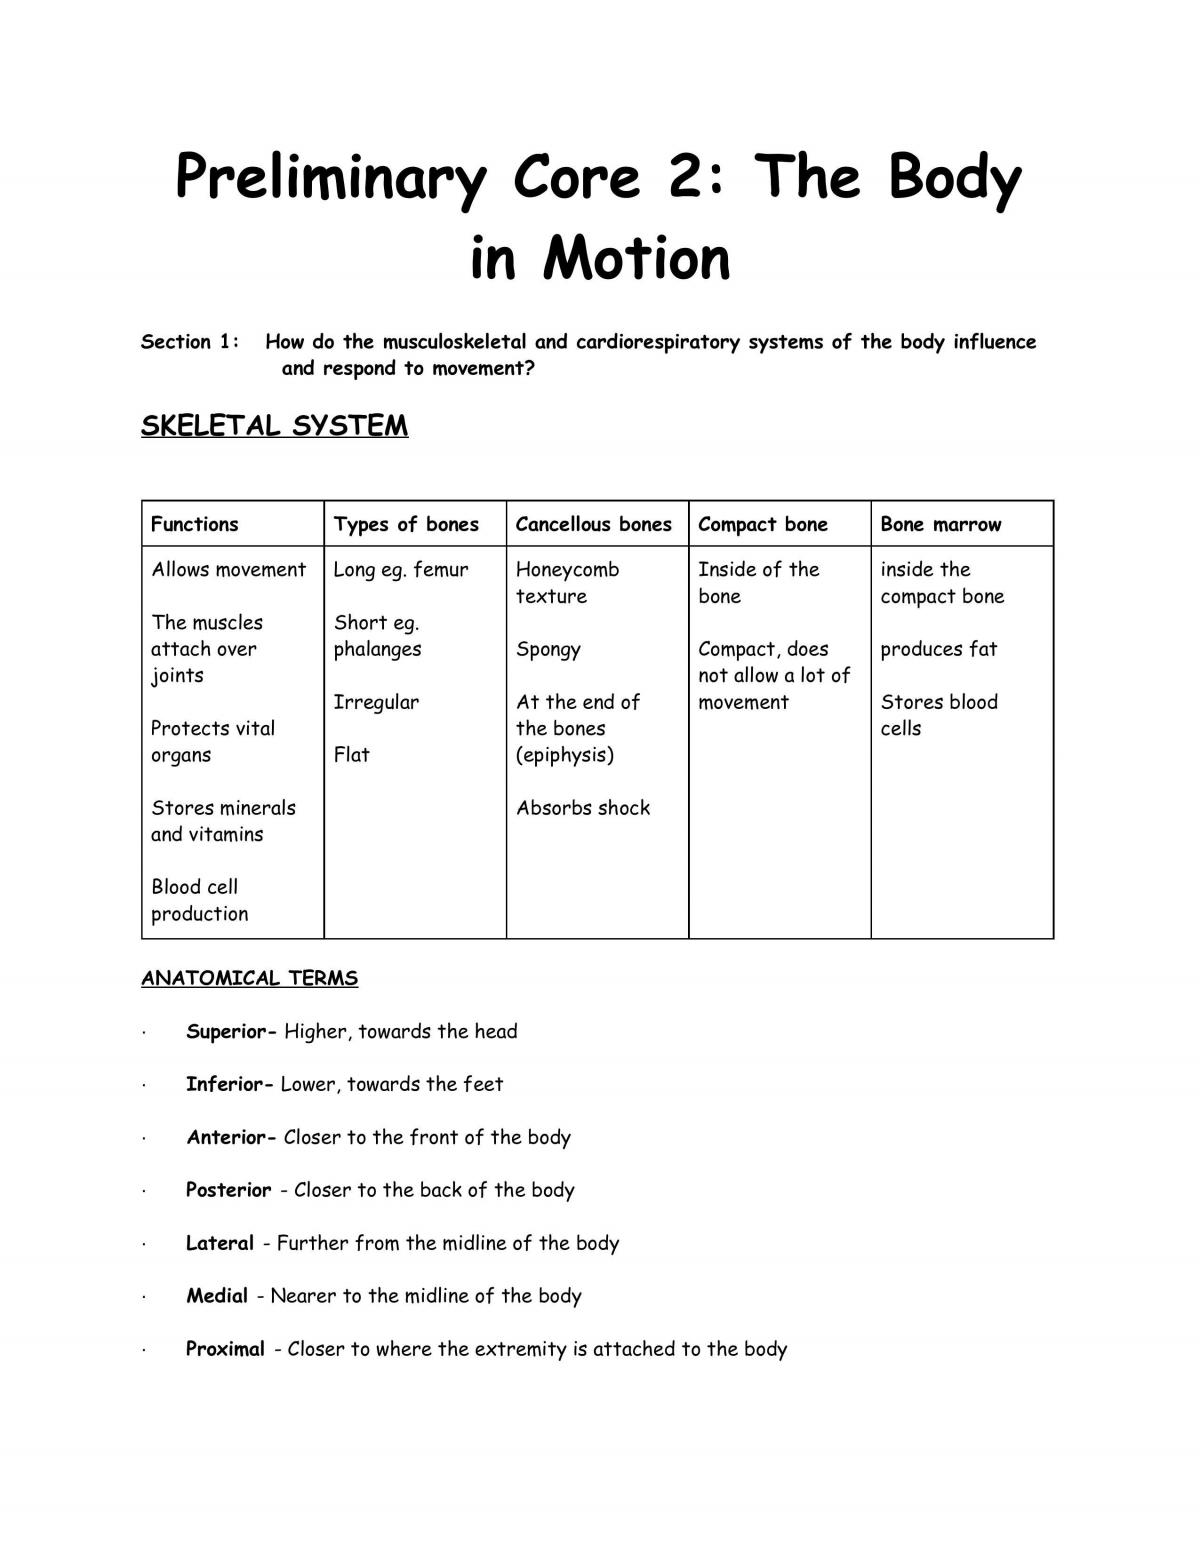 The Body in Motion Notes - Page 1